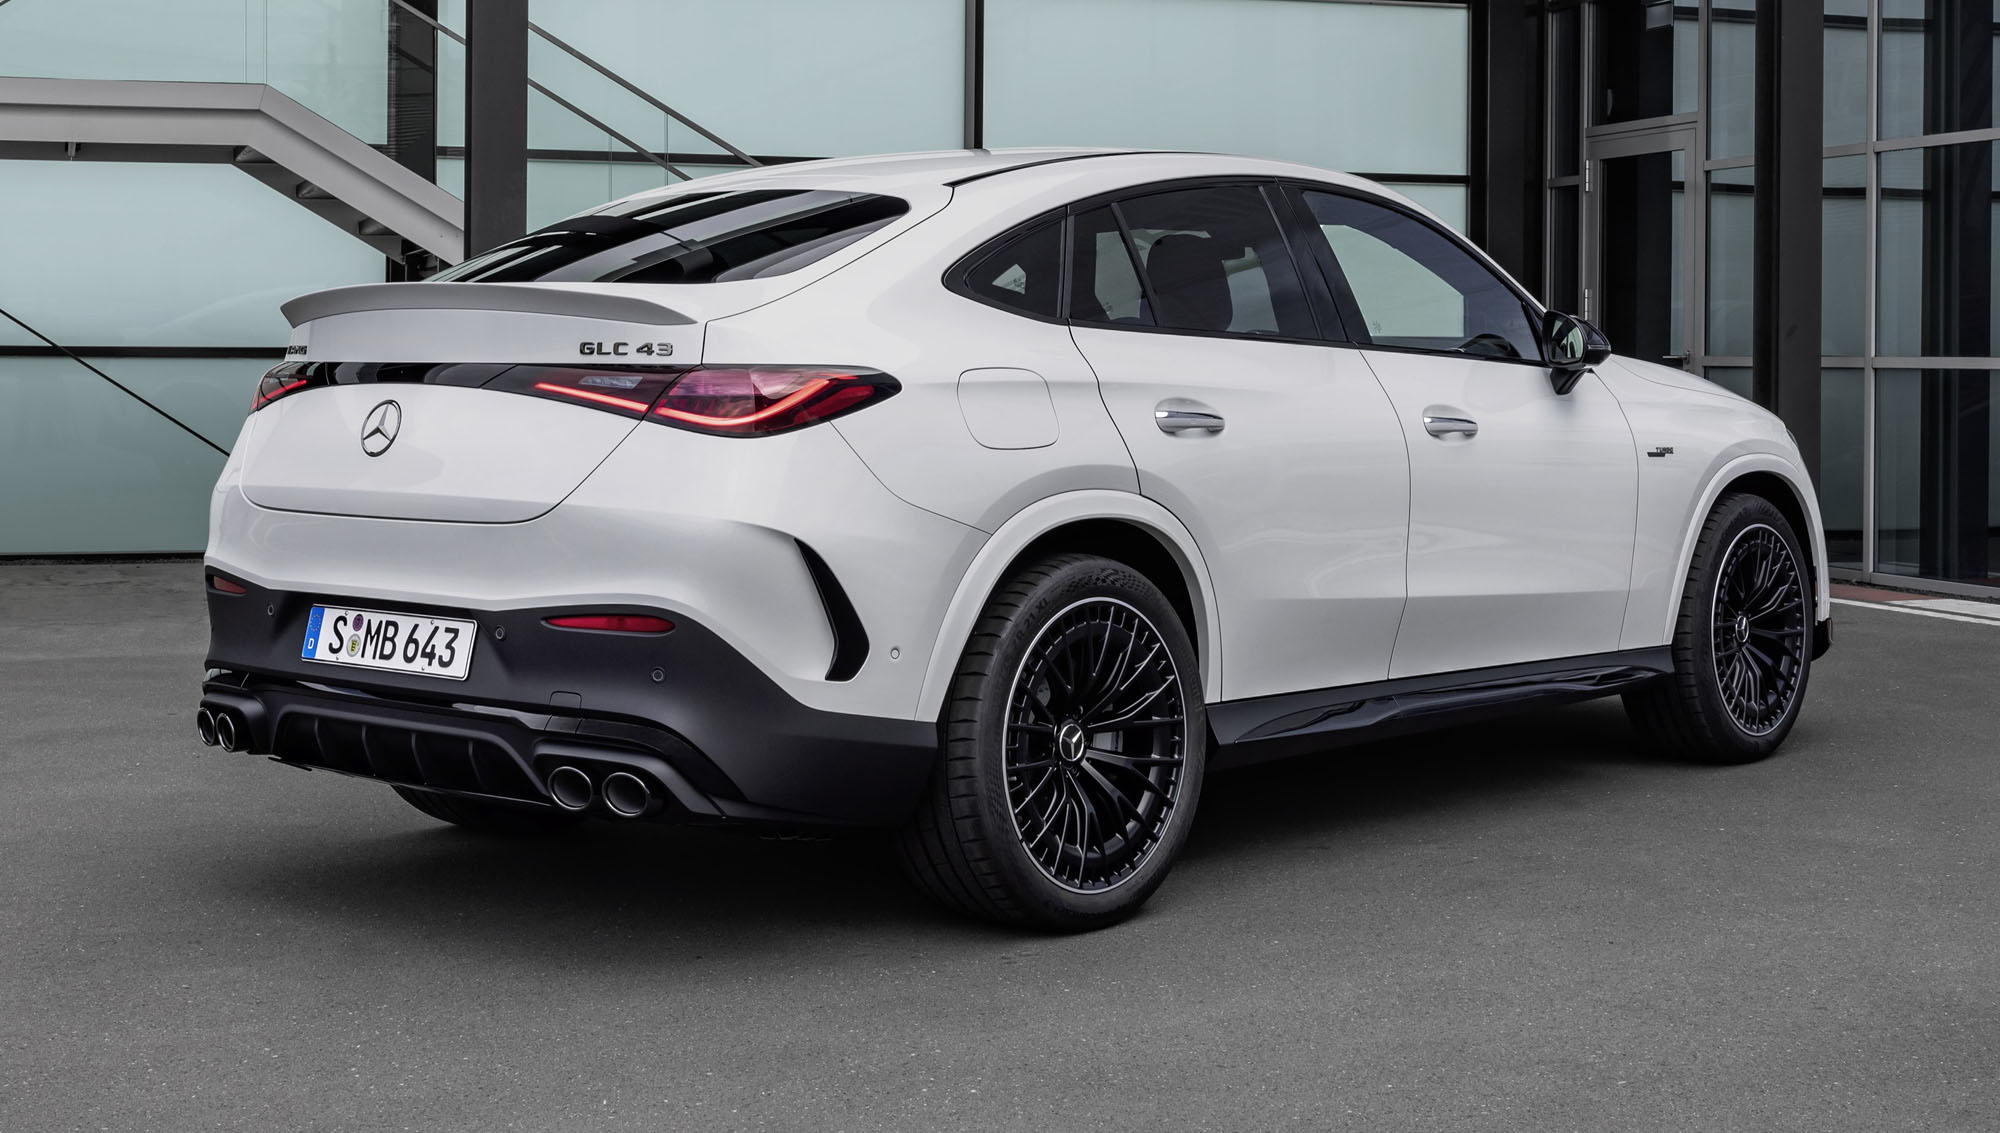 mercedes-amg, mercedes-amg glc coupe, mercedes-benz, new mercedes-amg clc coupe revealed – specifications